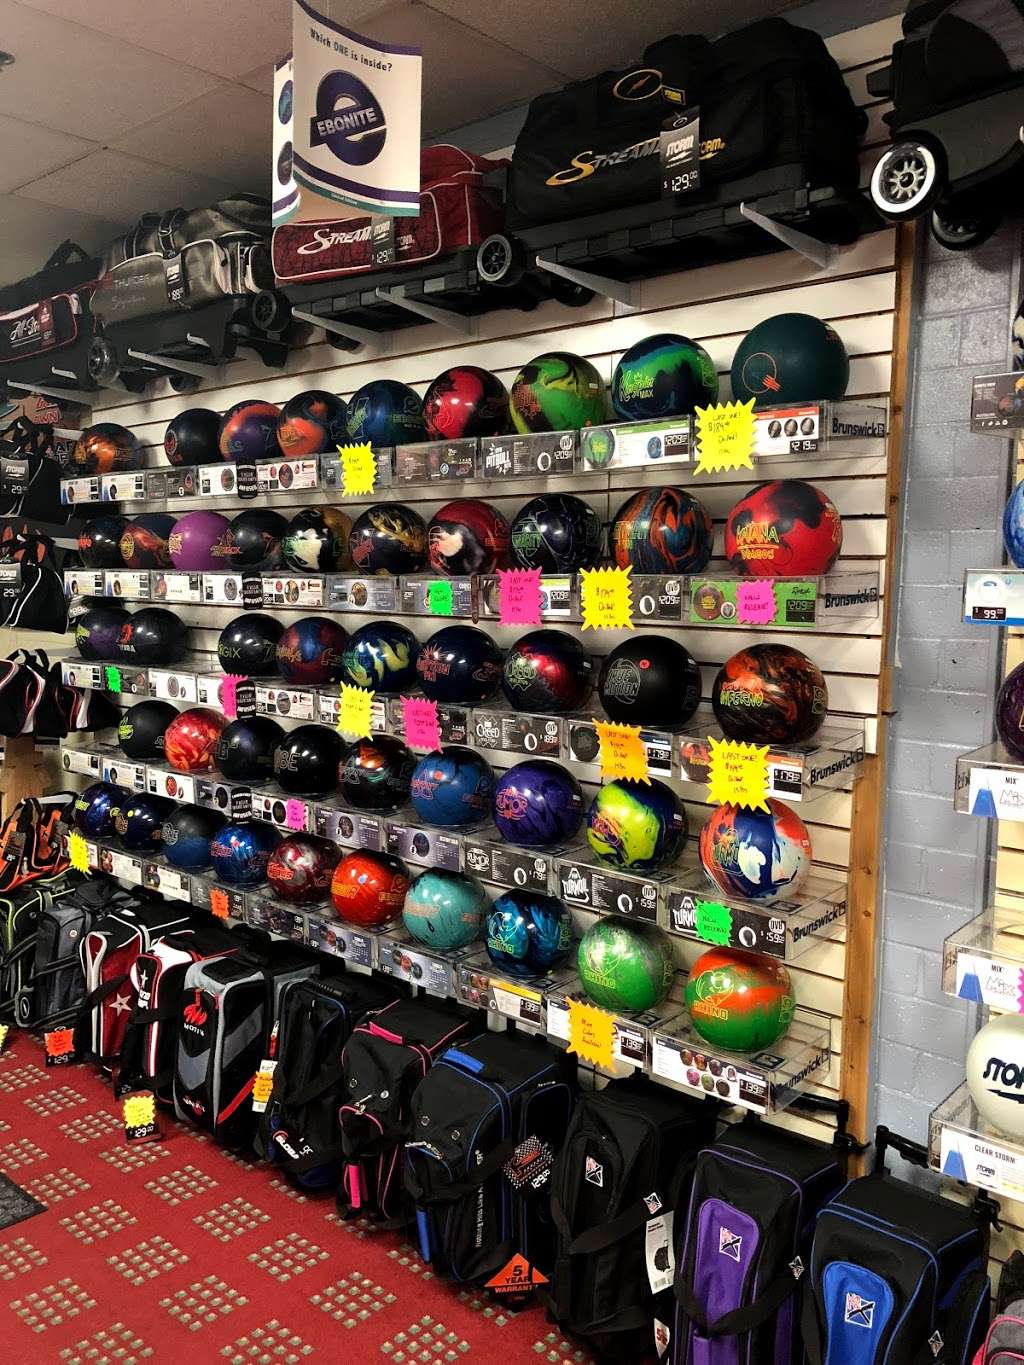 Double Js Bowling Supply | 10201 College Blvd, Overland Park, KS 66210 | Phone: (701) 690-1037